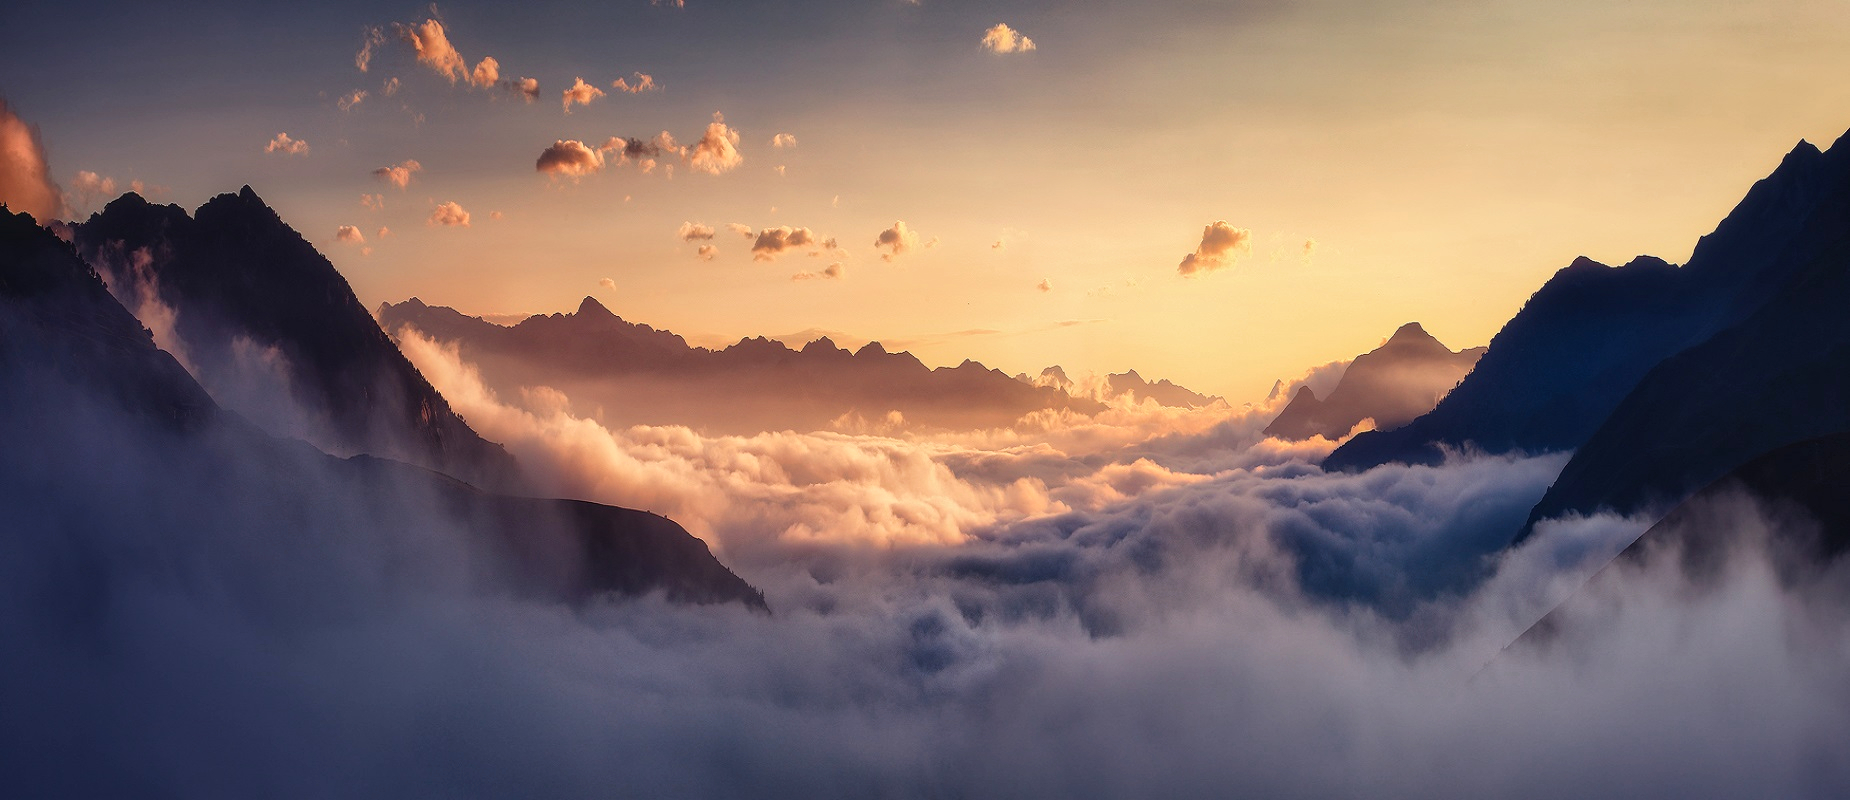 Clouds Sunset Mountains Landscape Photography Nature Outdoors 1850x800